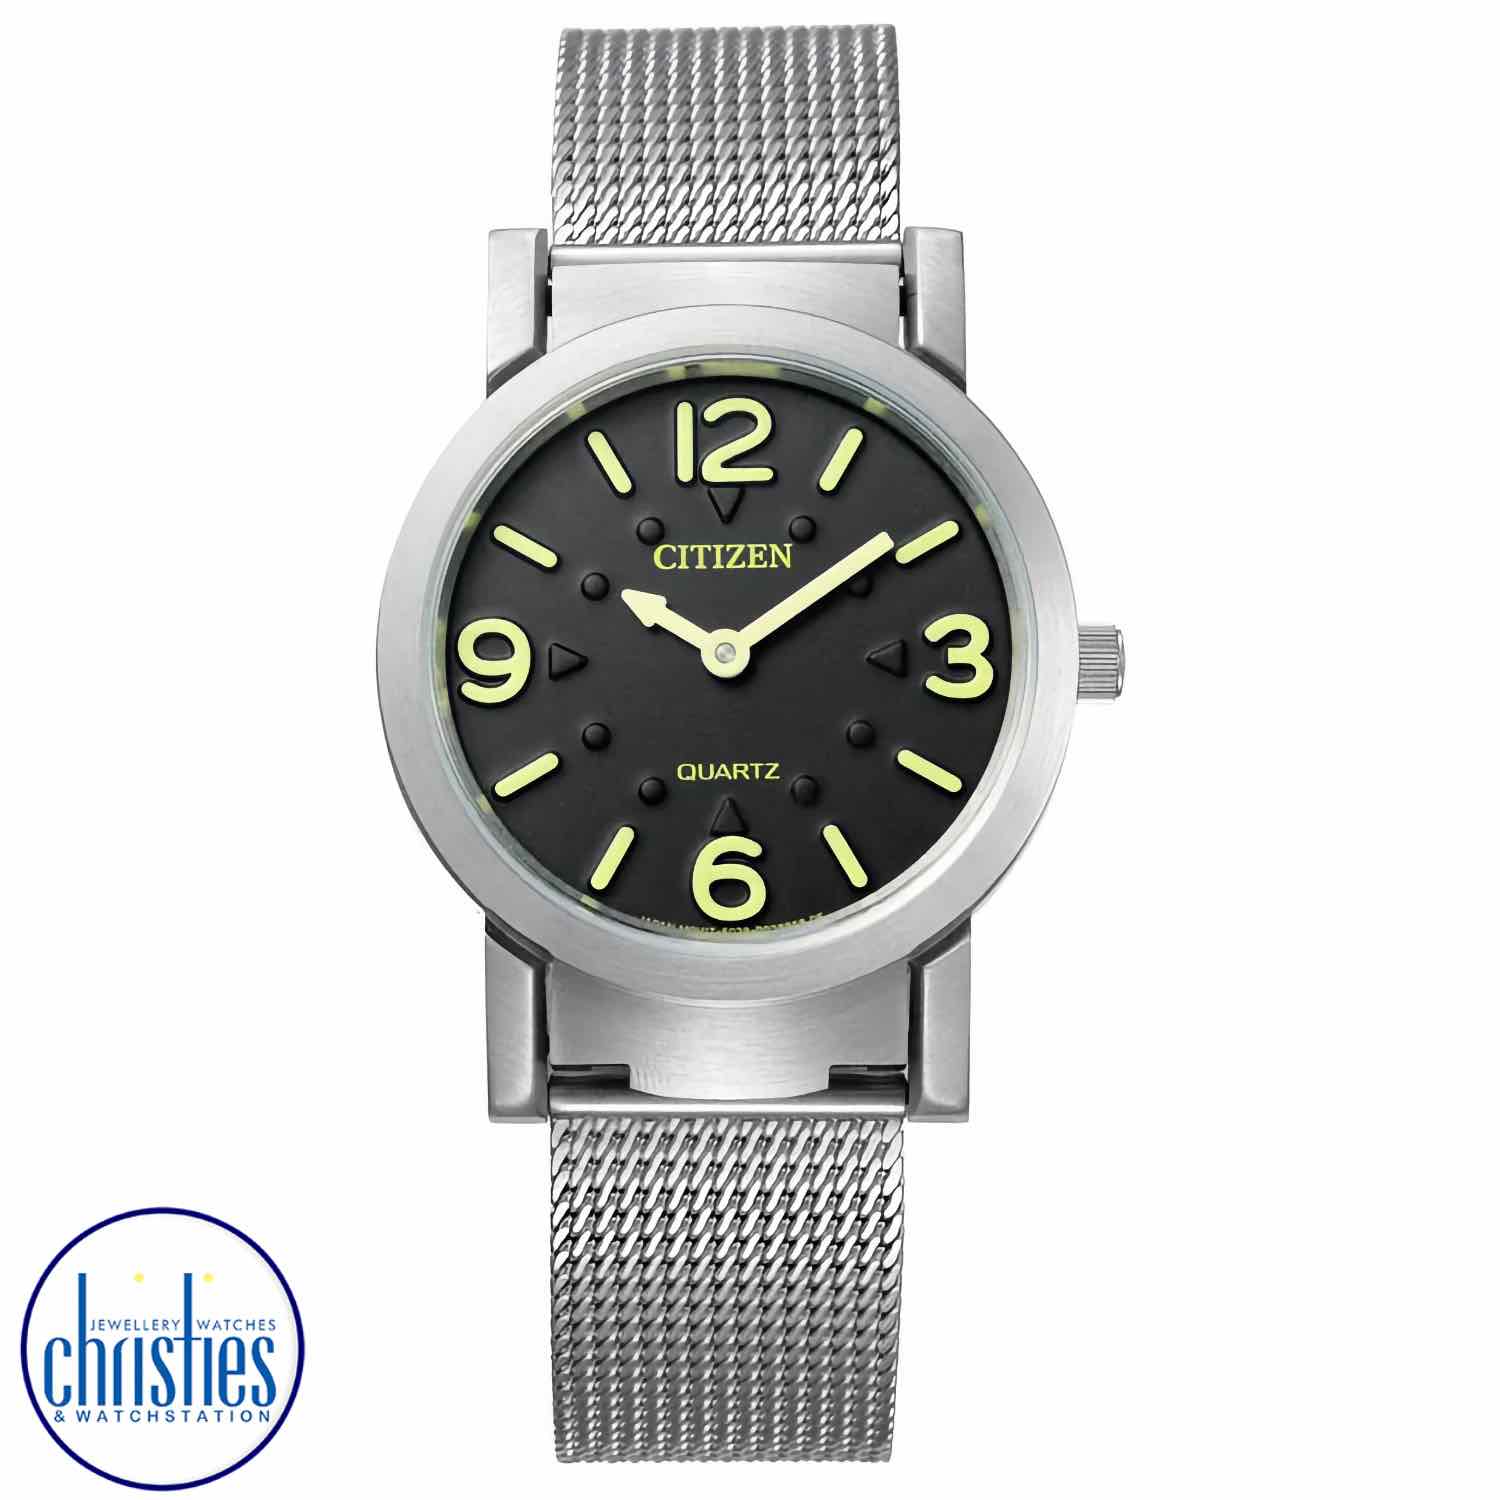 AC2200-55E CITIZEN Watch for Visually Impaired. Citizens goal was to design a watch that everyone, visually impaired or not, could use and enjoy equally.